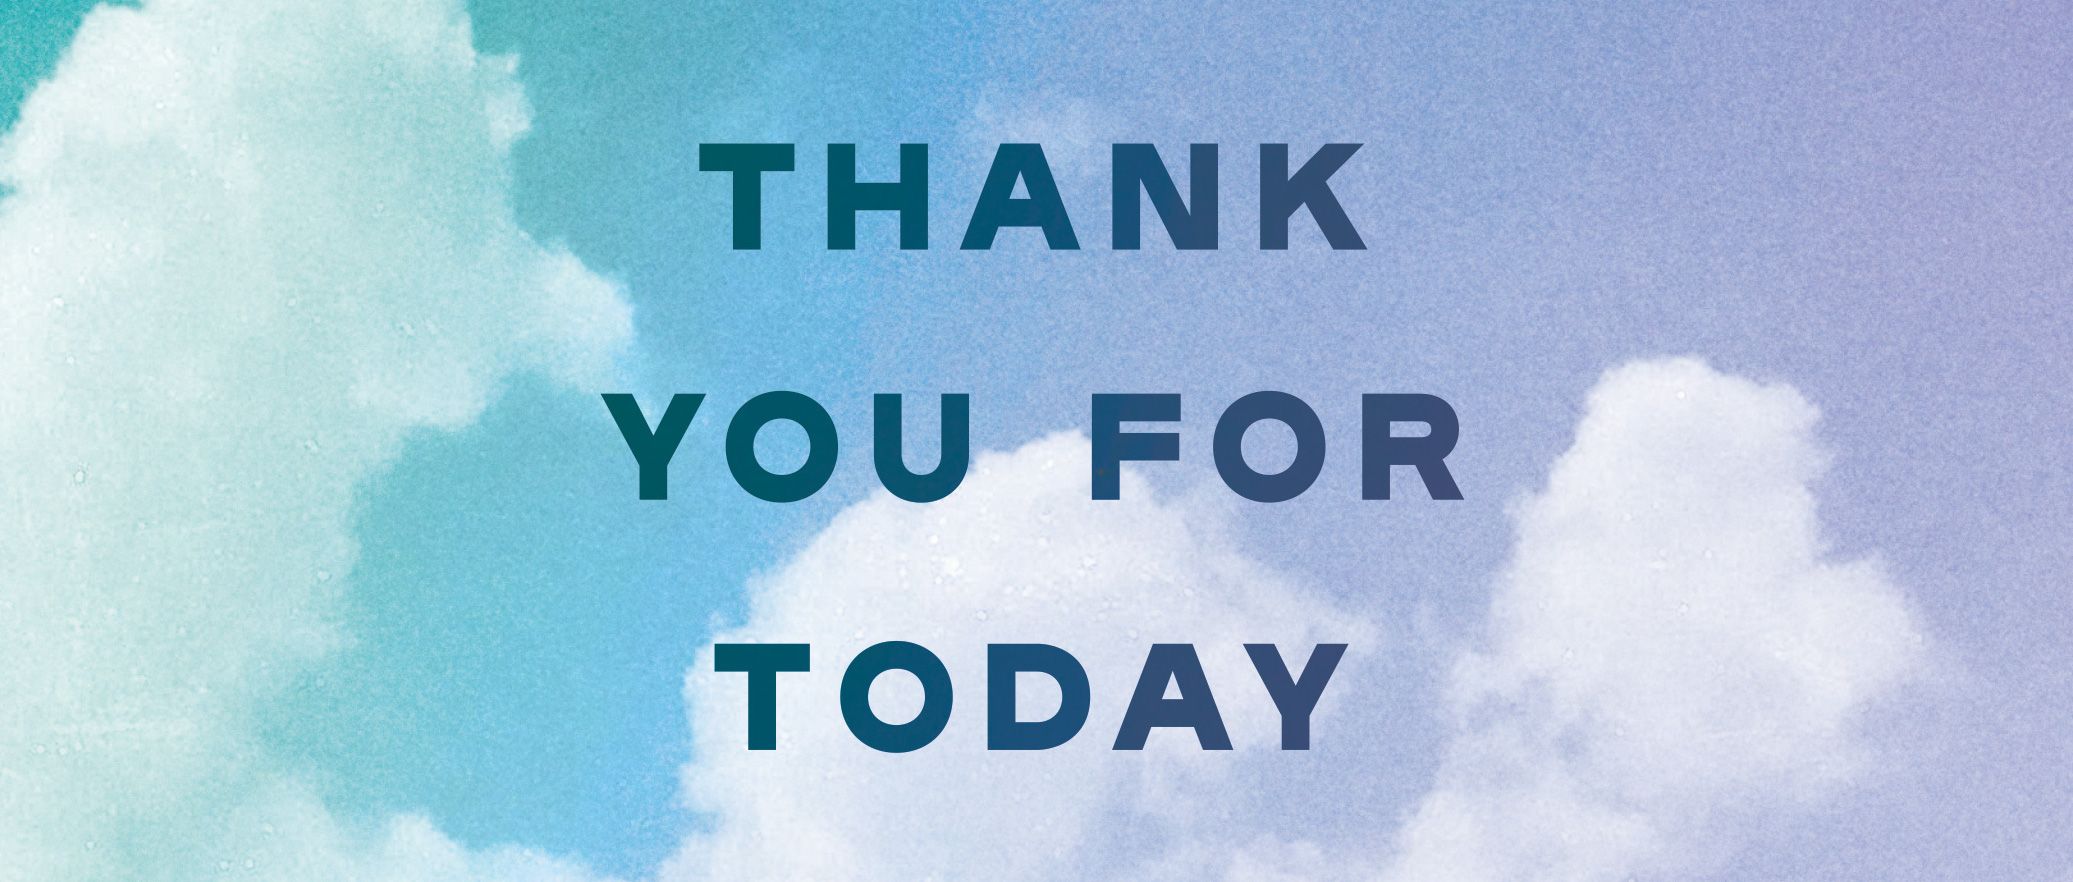 Death Cab for Cutie continues the 2010s letdown with ‘Thank You for Today’